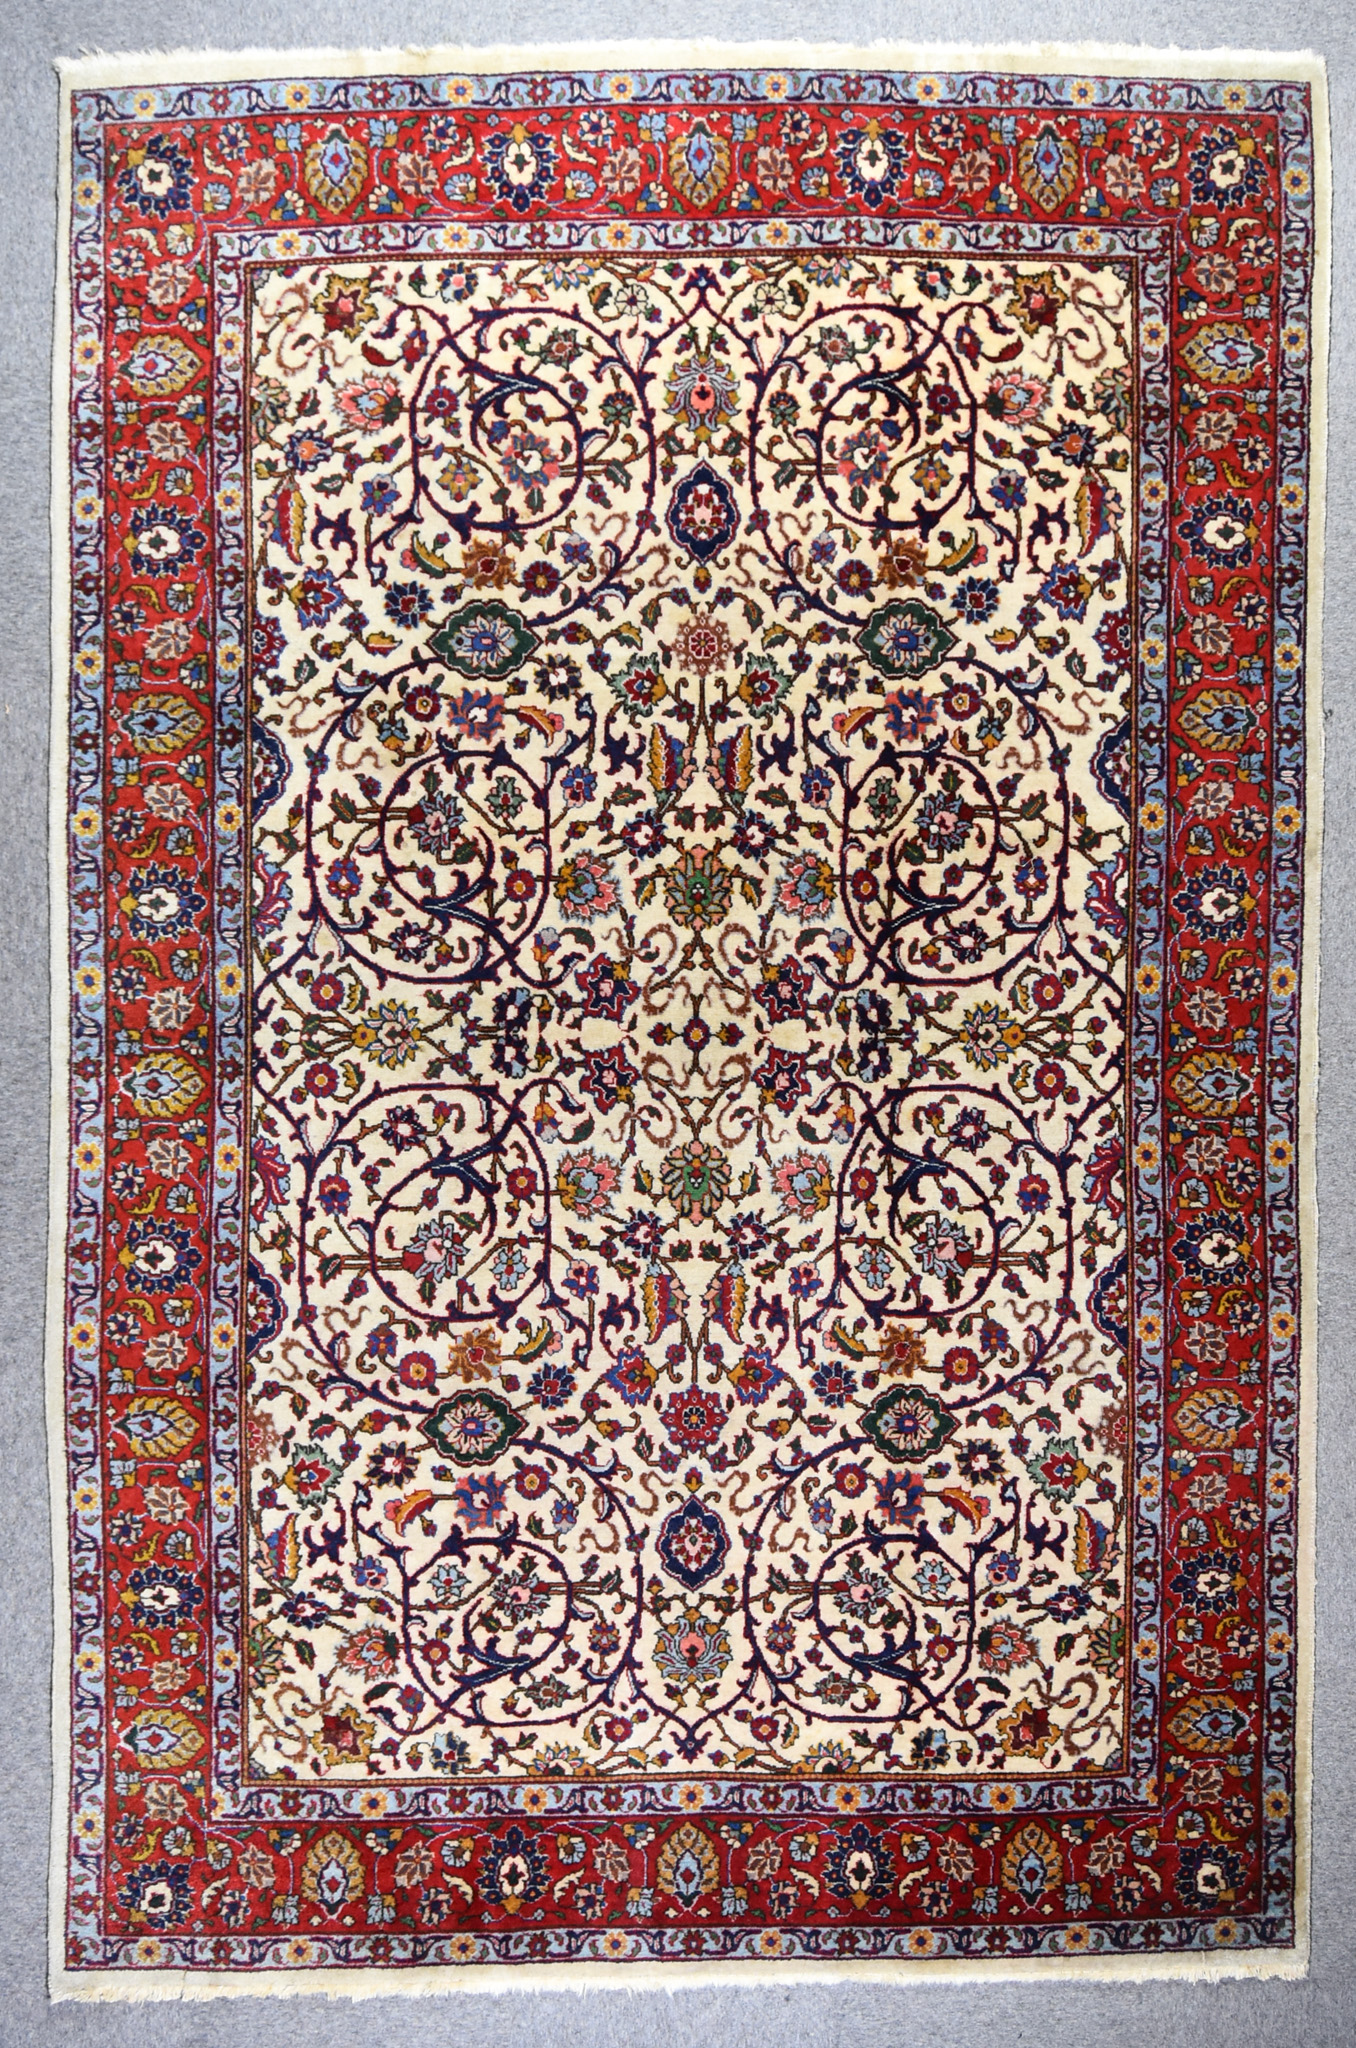 An Antique Tabriz Carpet, woven in colours of ivory, navy blue, green and wine, the field filled